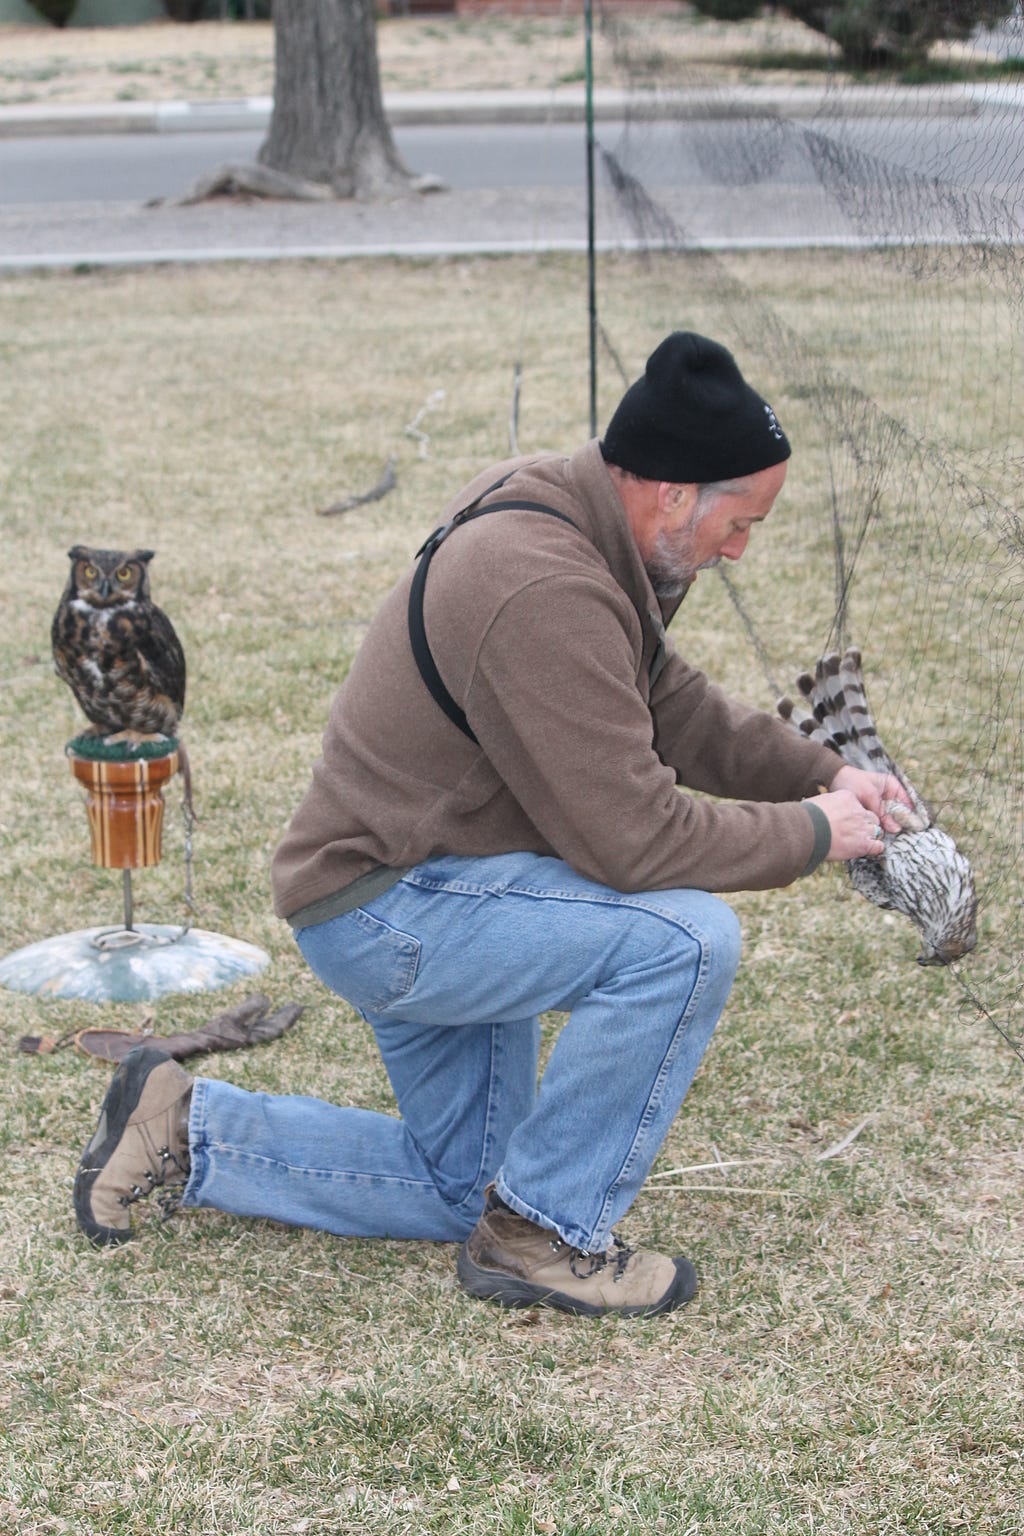 Brian carefully removes a juvenile Cooper’s hawk removed from mist net, with a Great Horned Owl perched in the background during a demonstration. Photo Credit: James Walker